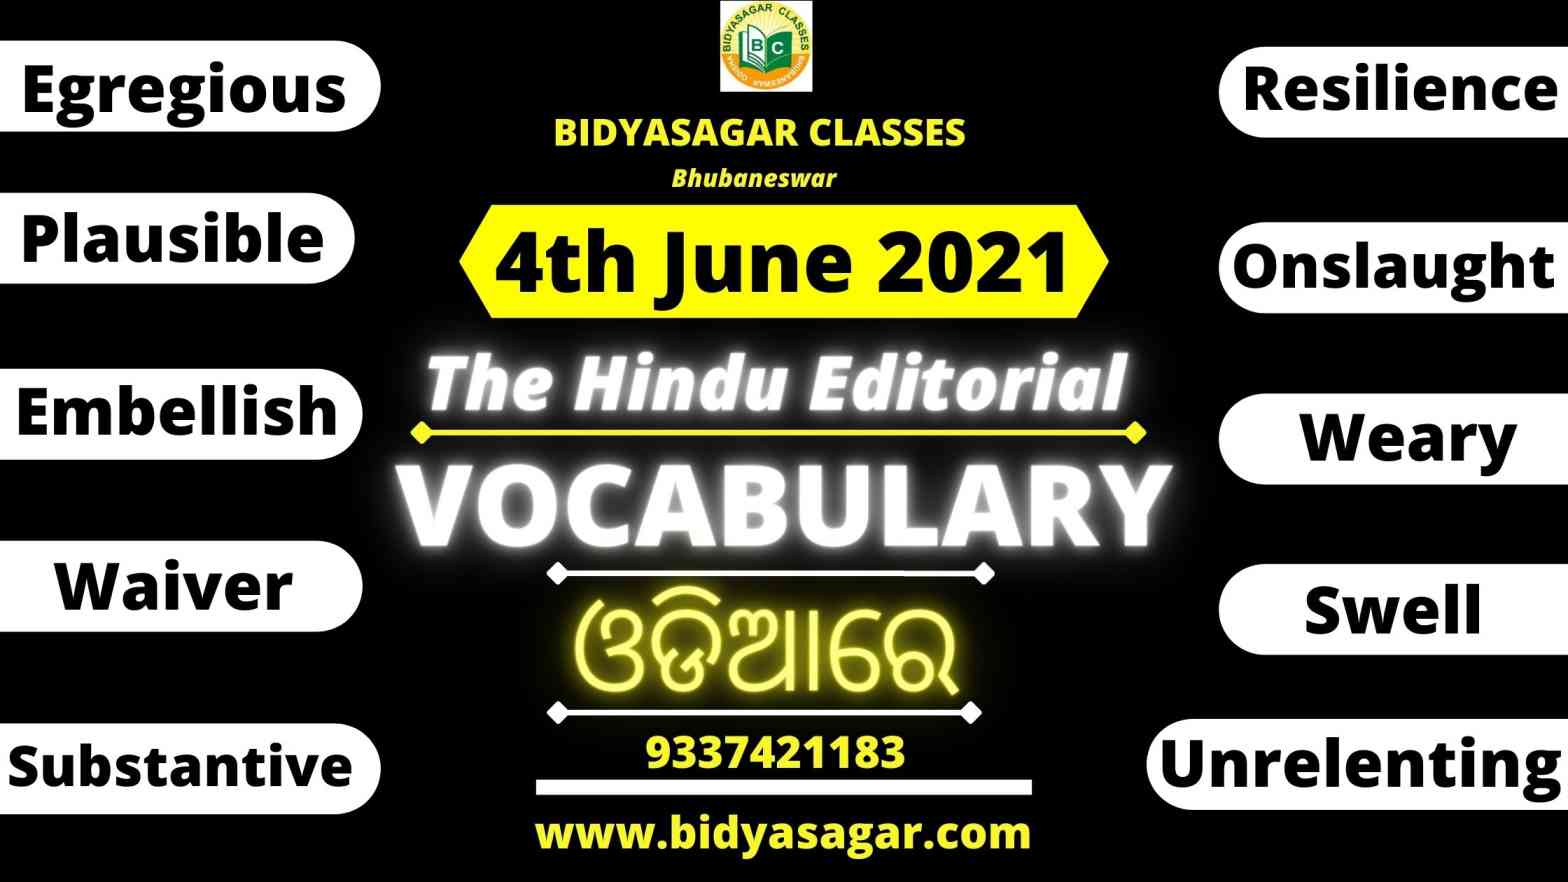 The Hindu Editorial Vocabulary of 4th June 2021